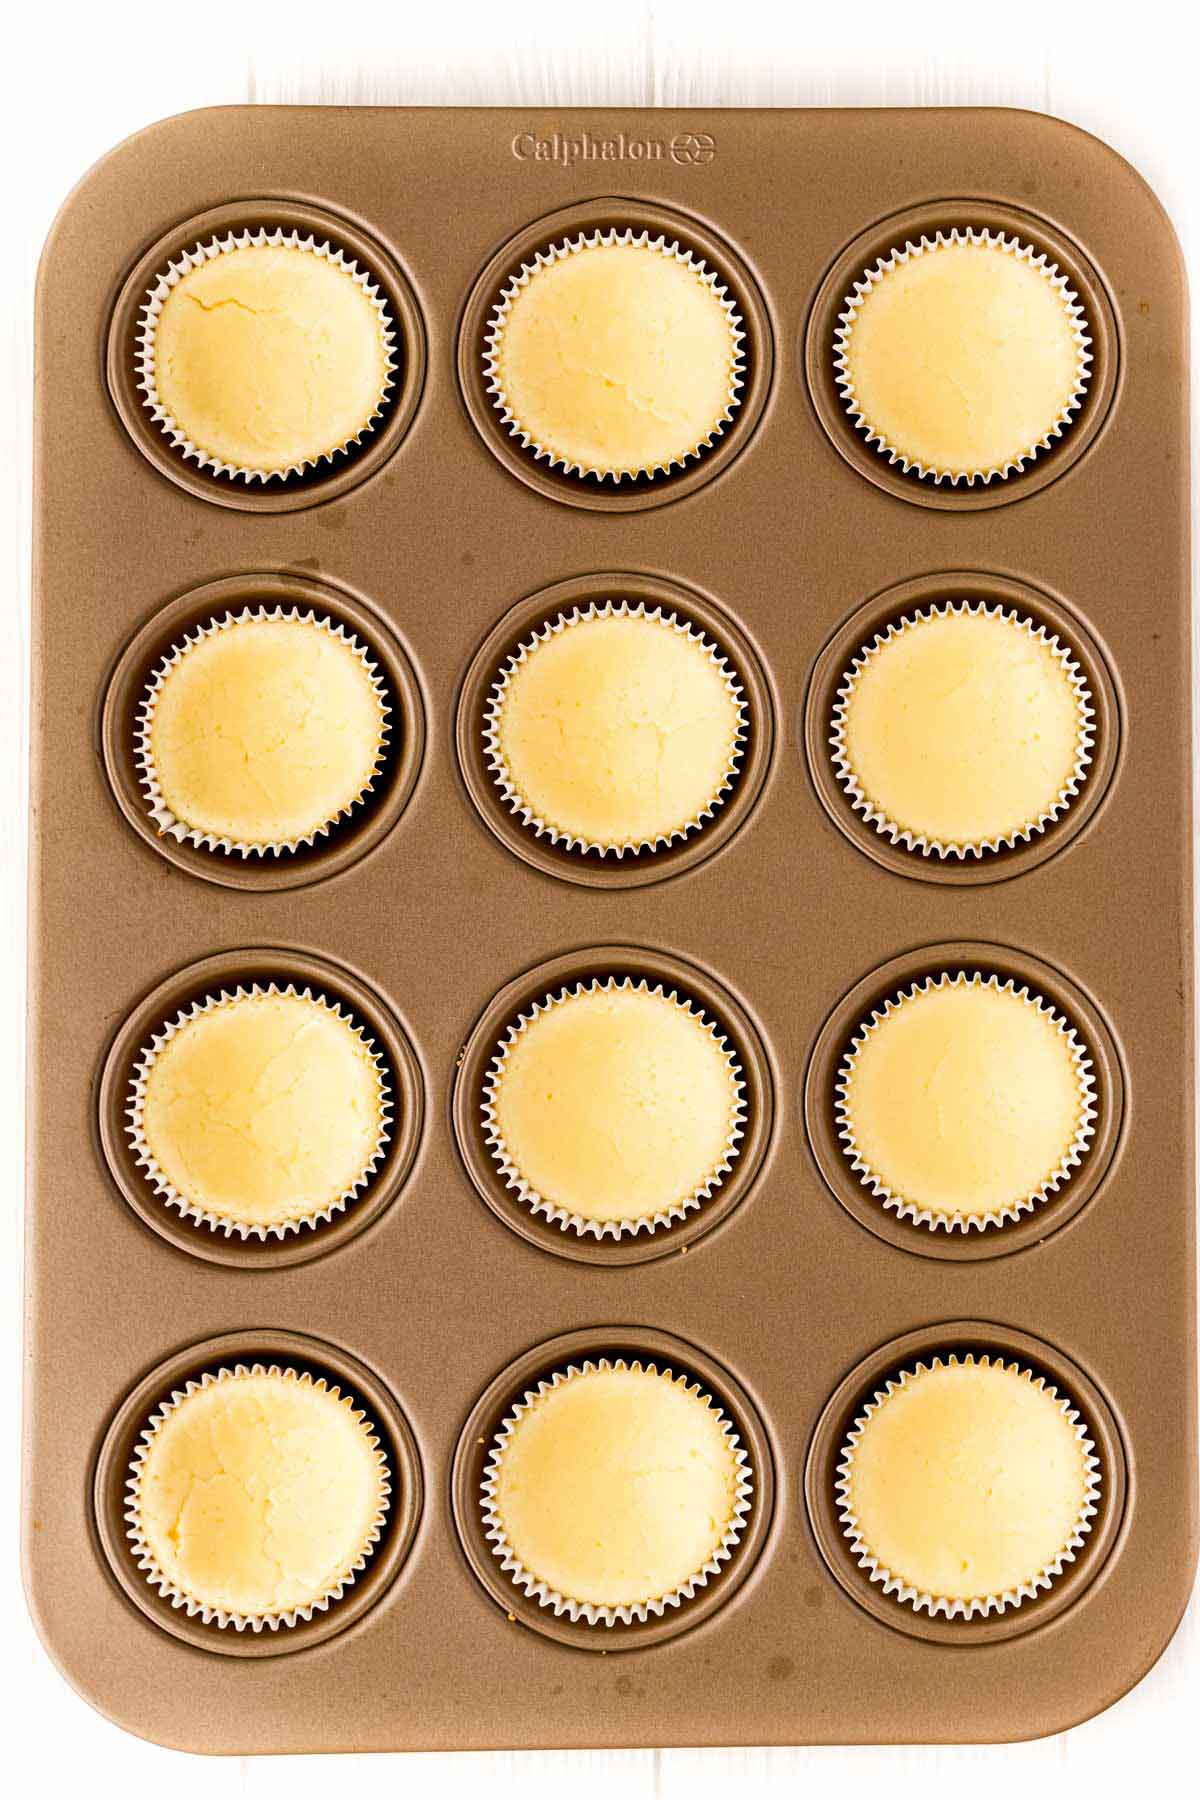 Mini egg cheesecakes after baking in a muffin tin